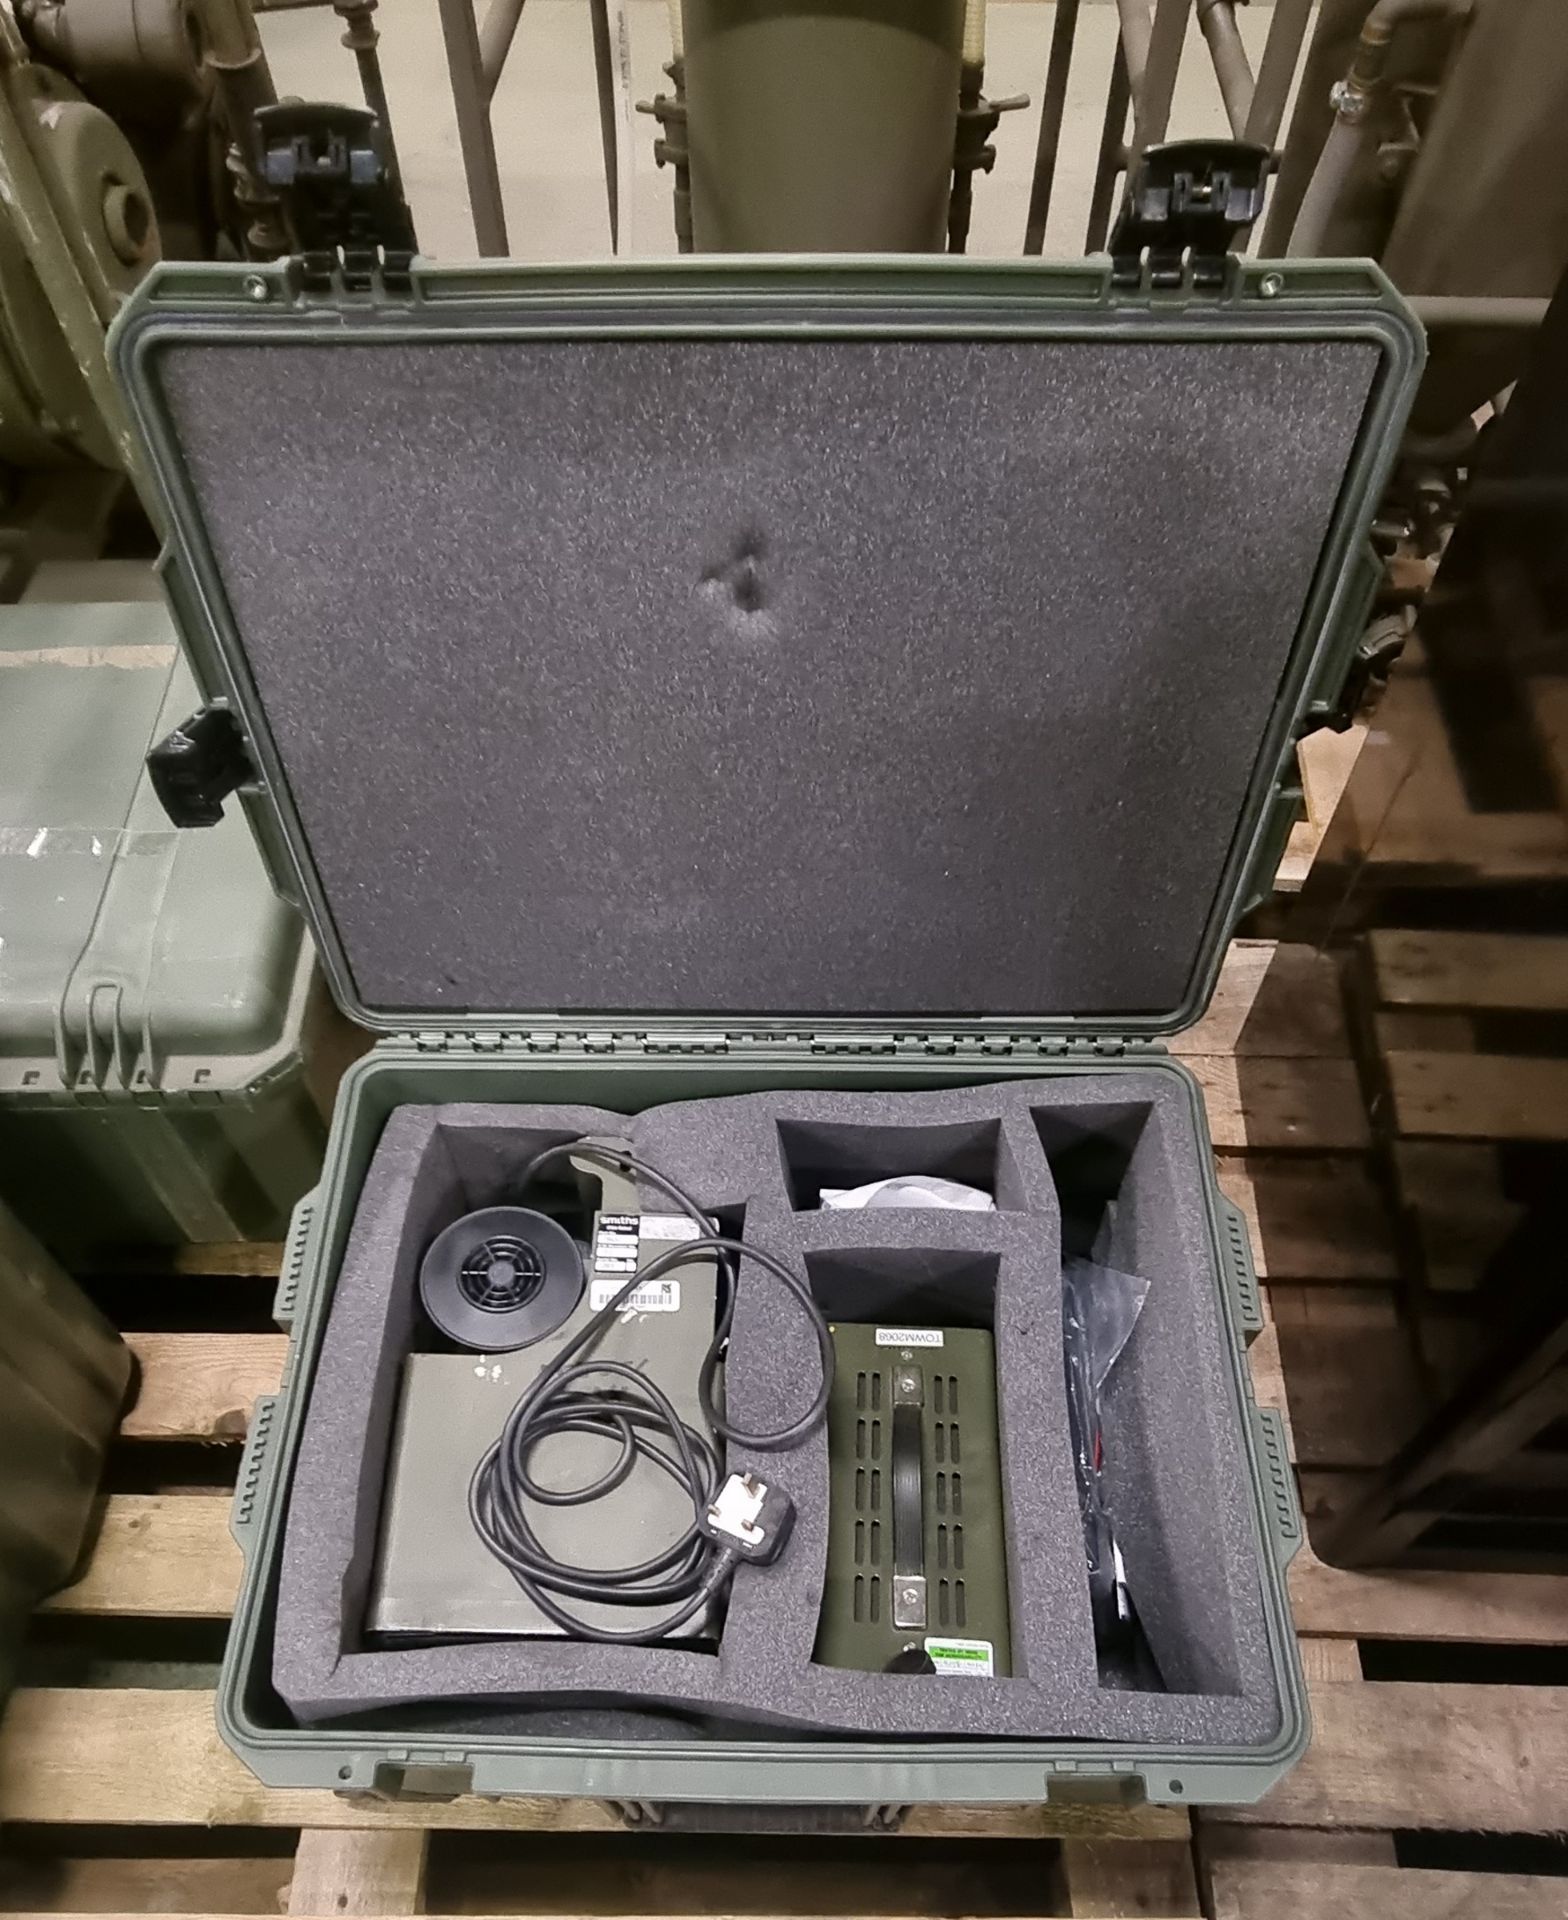 Portable anesthesia ventilator in heavy duty carry case - Image 2 of 9